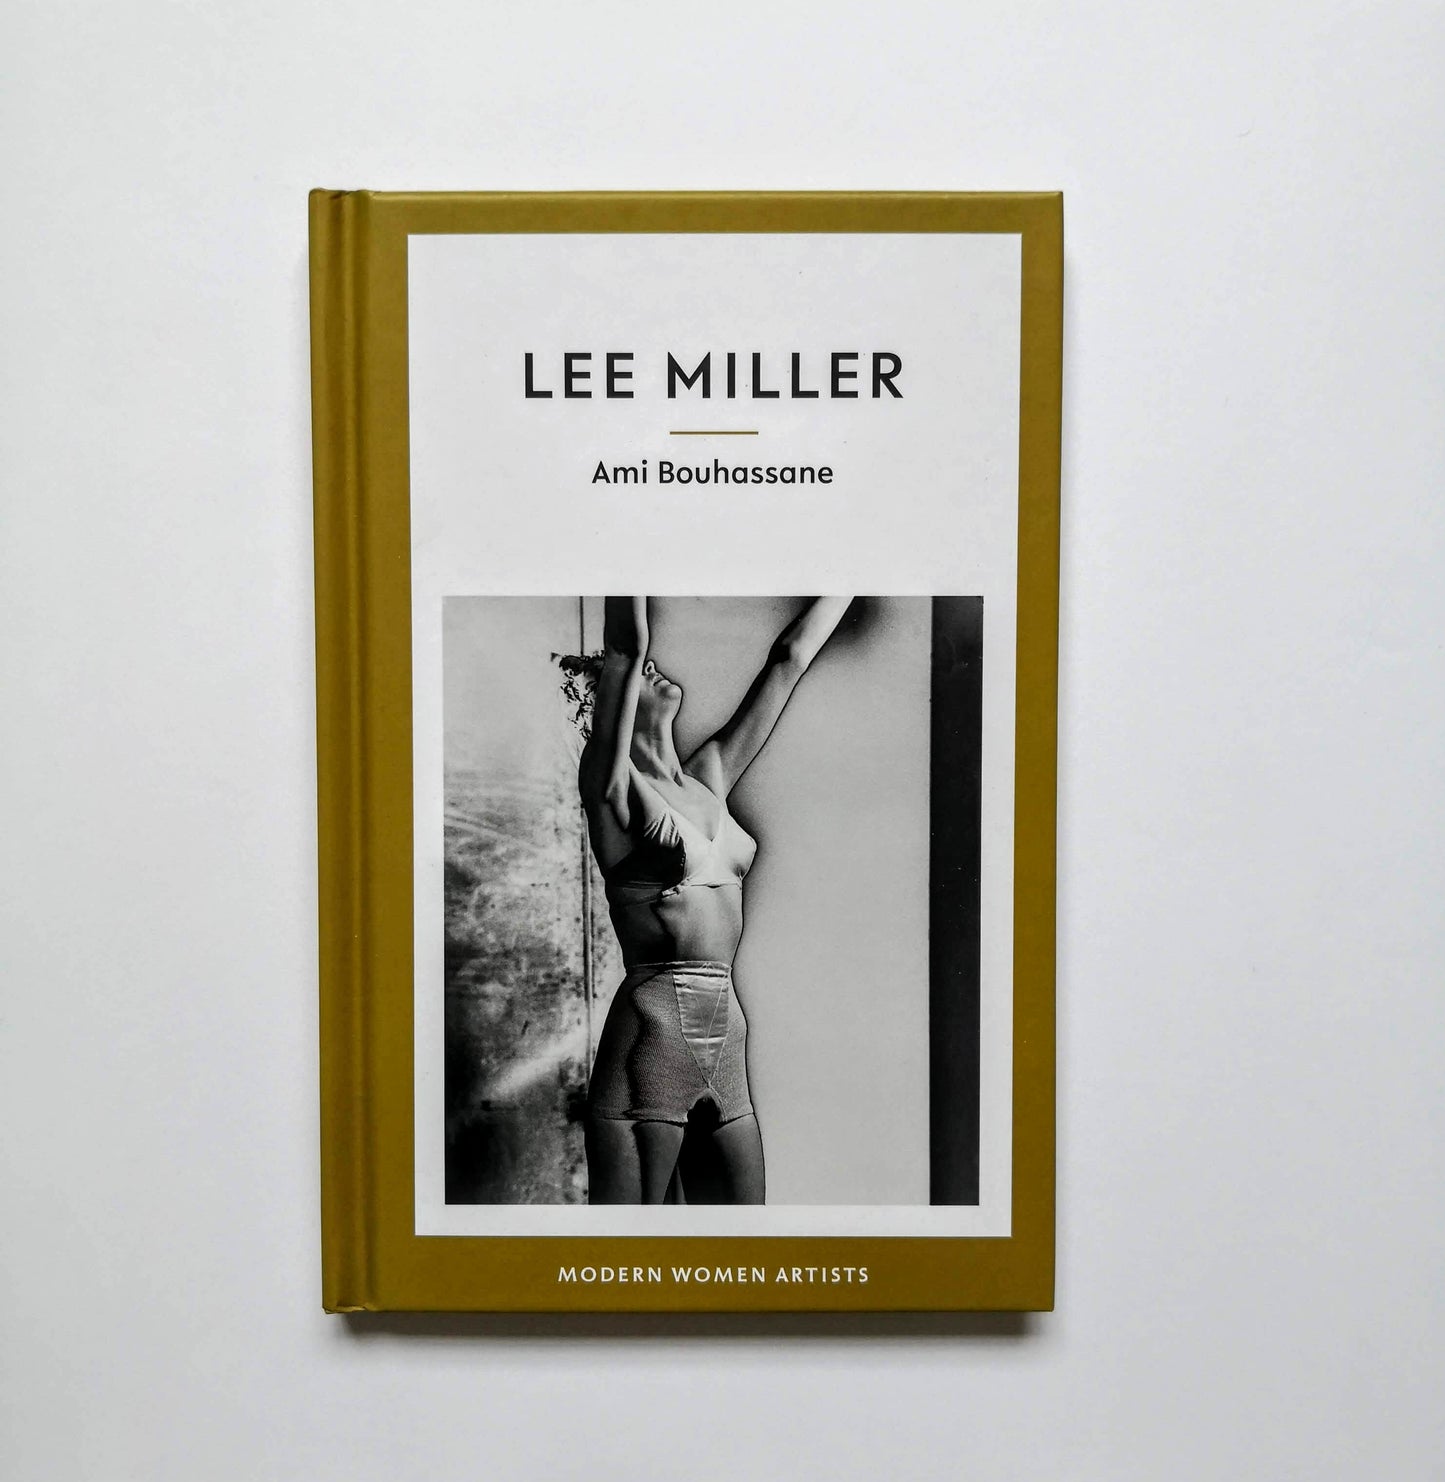 Lee Miller by Ami Bouhassane /// #5